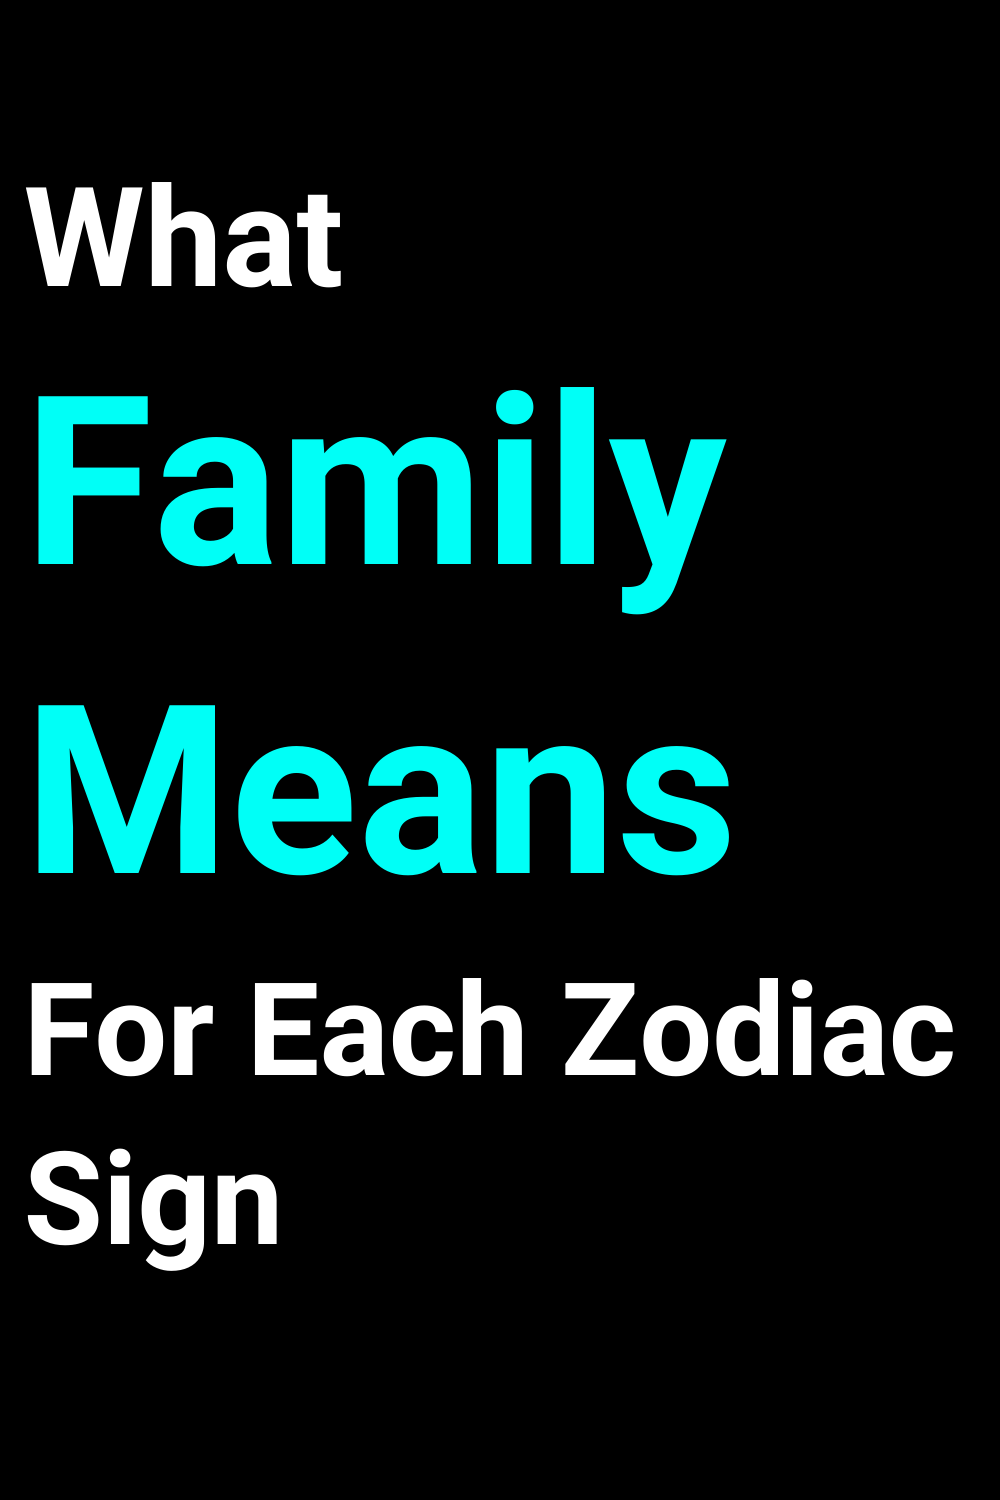 What Family Means For Each Zodiac Sign